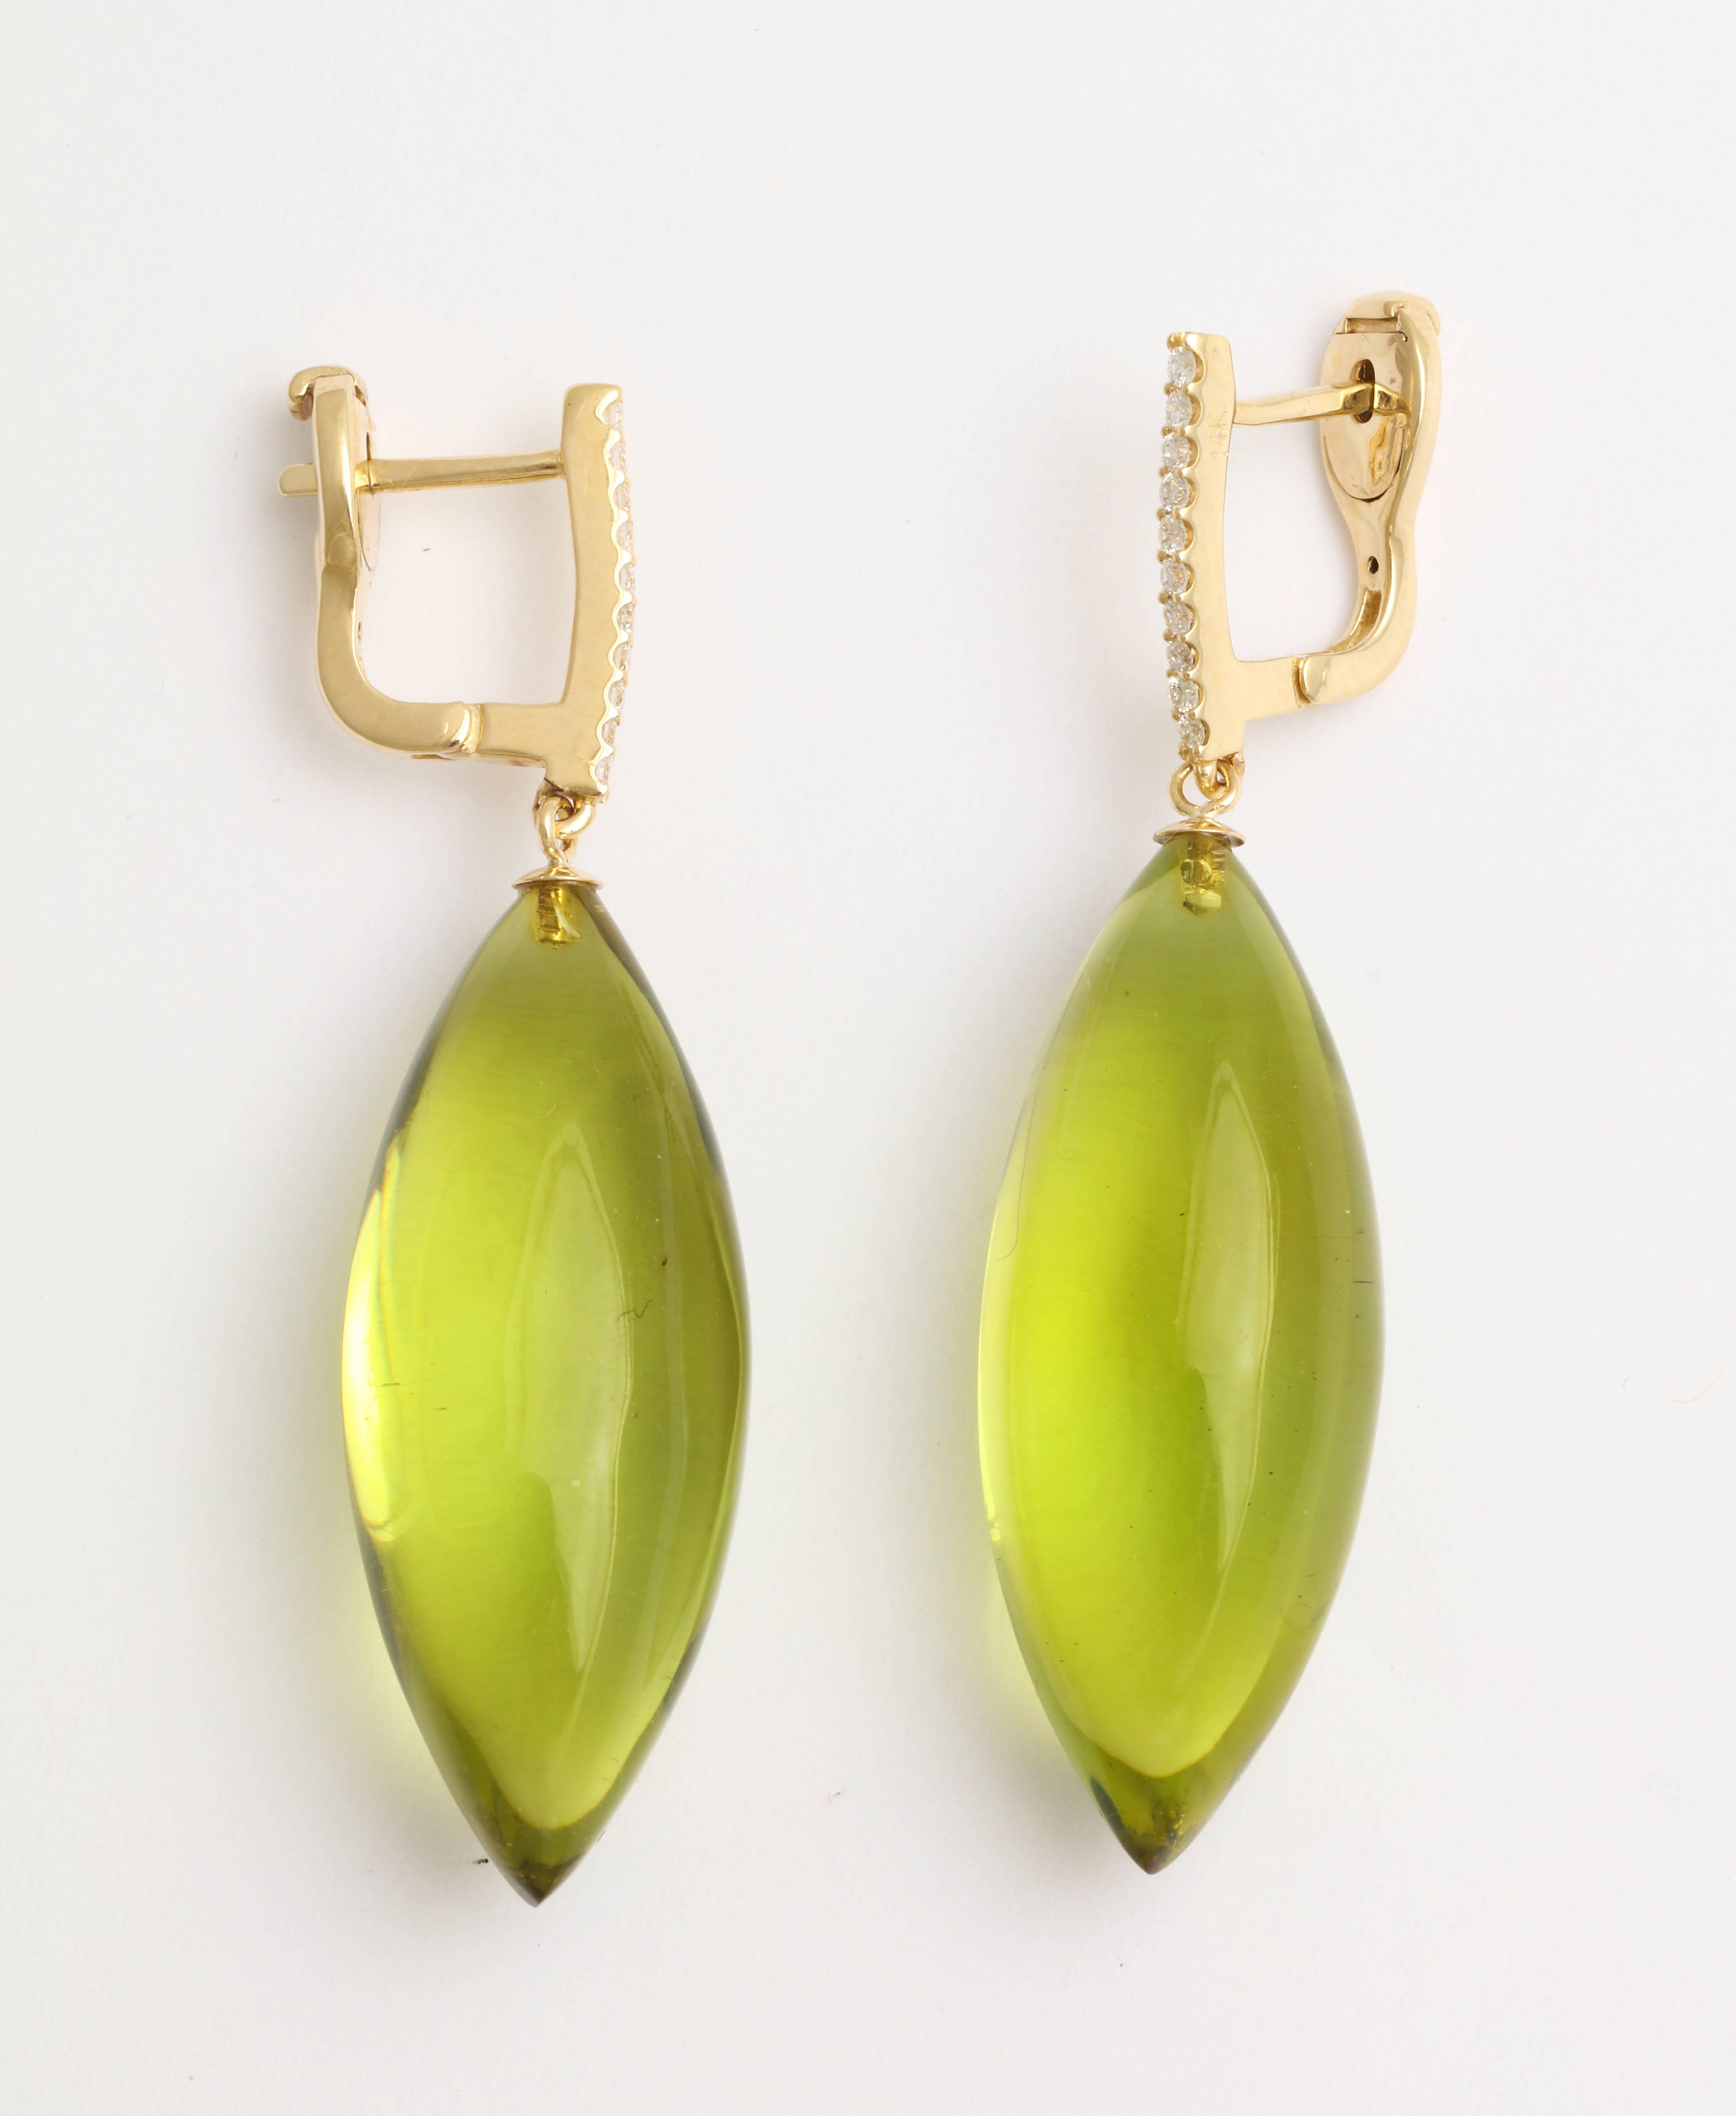 This very shade of green has just been voted Pantone's color of the year for 2017, so here is your chance to get a jump on the competition.  While measuring a full 1 3/4 inch (5cm) long, each earring only weighs 1/8 of an ounce (4g). The clever use